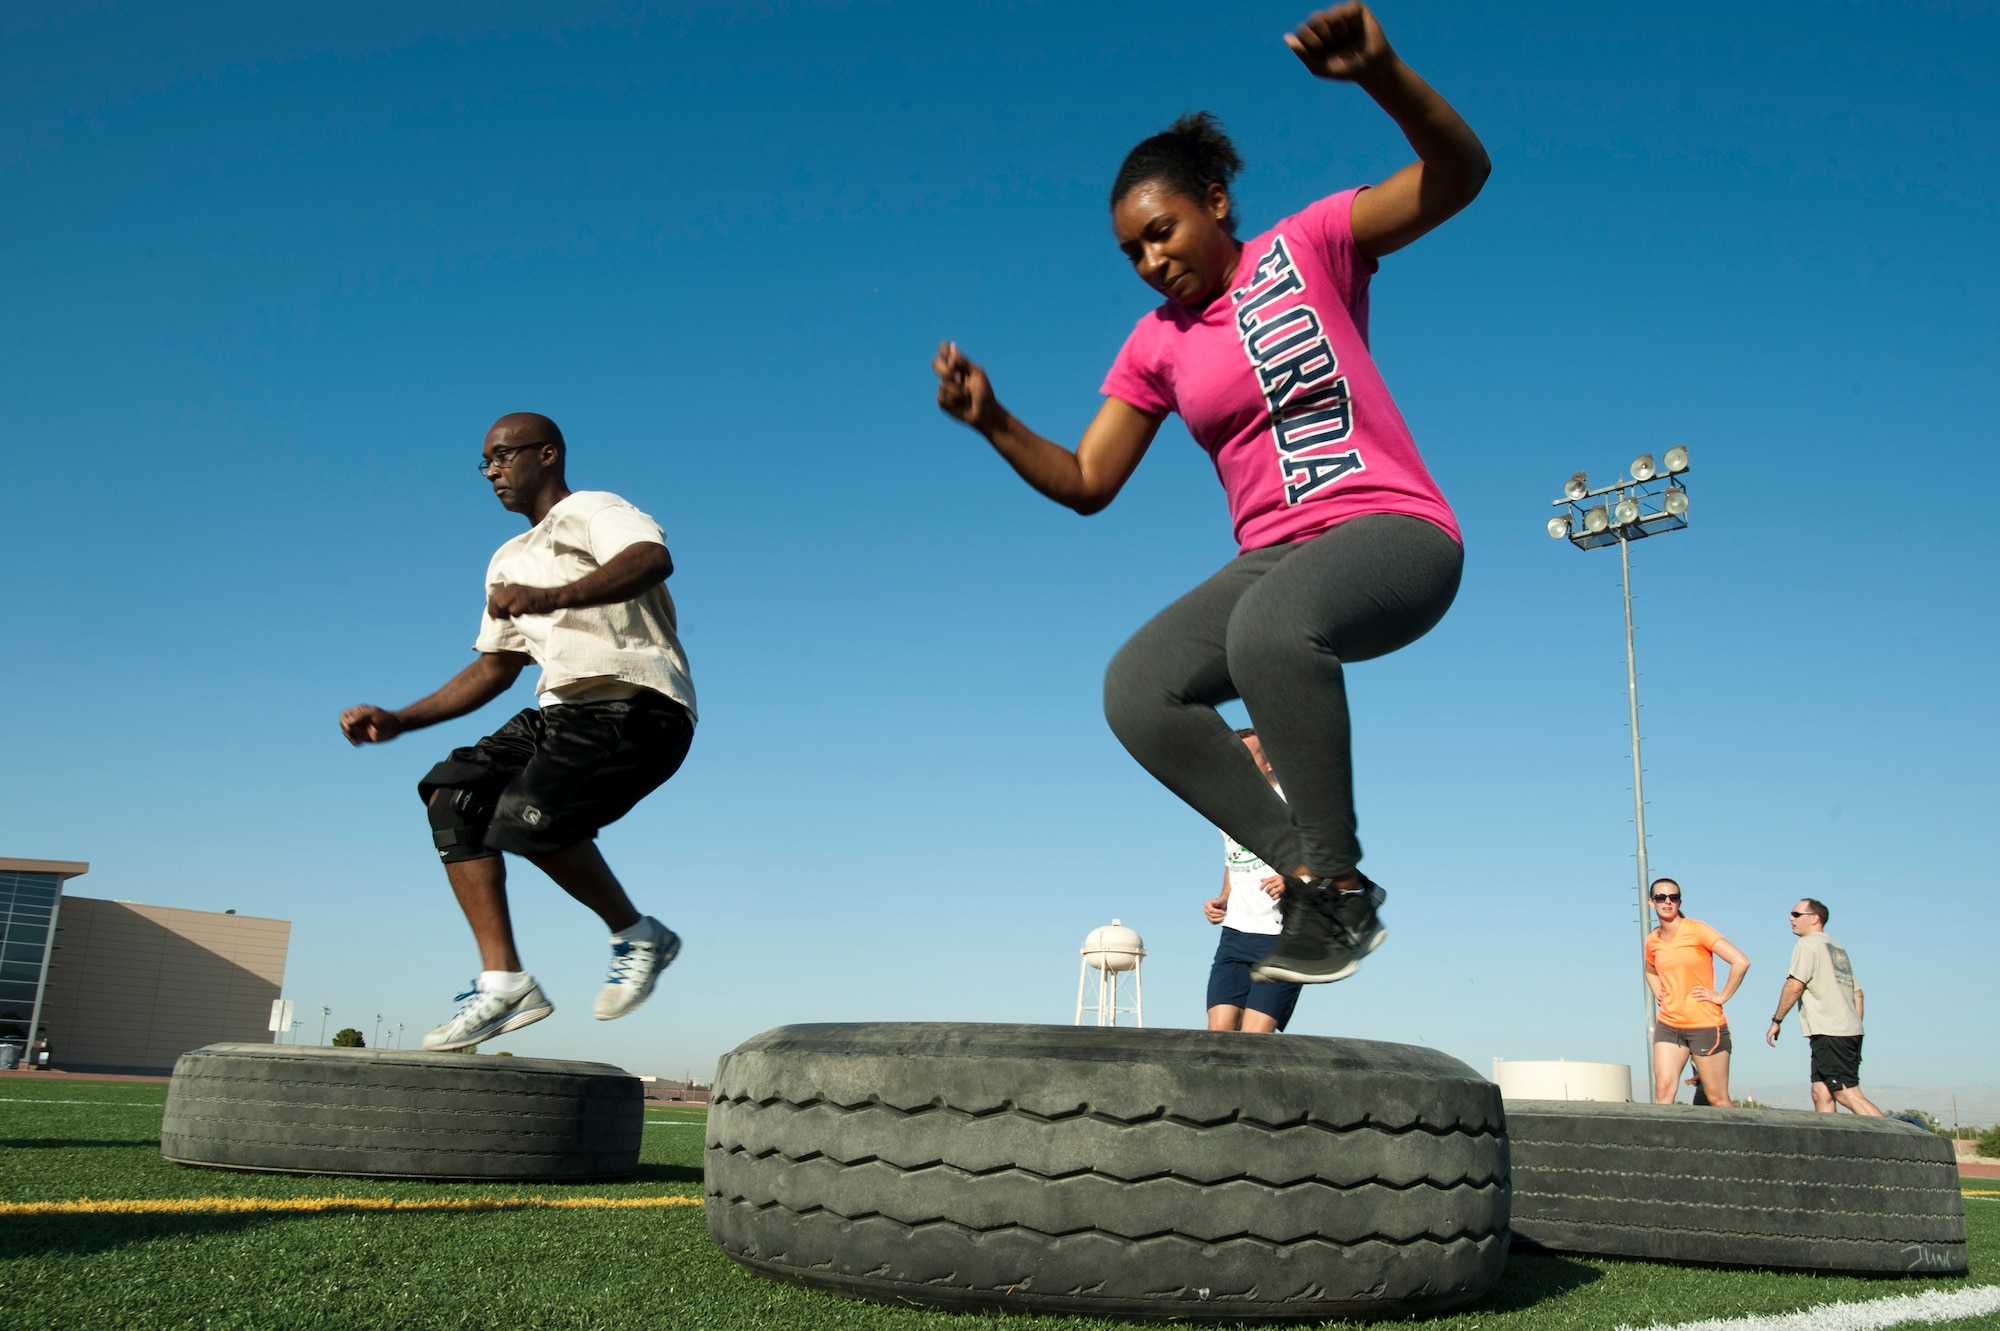 Participants jump through tires during a Warrior Trained Fitness exercise session at the Warrior Fitness Center June 12, 2014, at Nellis Air Force Base, Nev. The WTF exercise session was the last to be hosted by Missy Cornish, wife of Col. Barry Cornish, 99th Air Base Wing commander. (U.S. Air Force photo by Senior Airman Timothy Young)